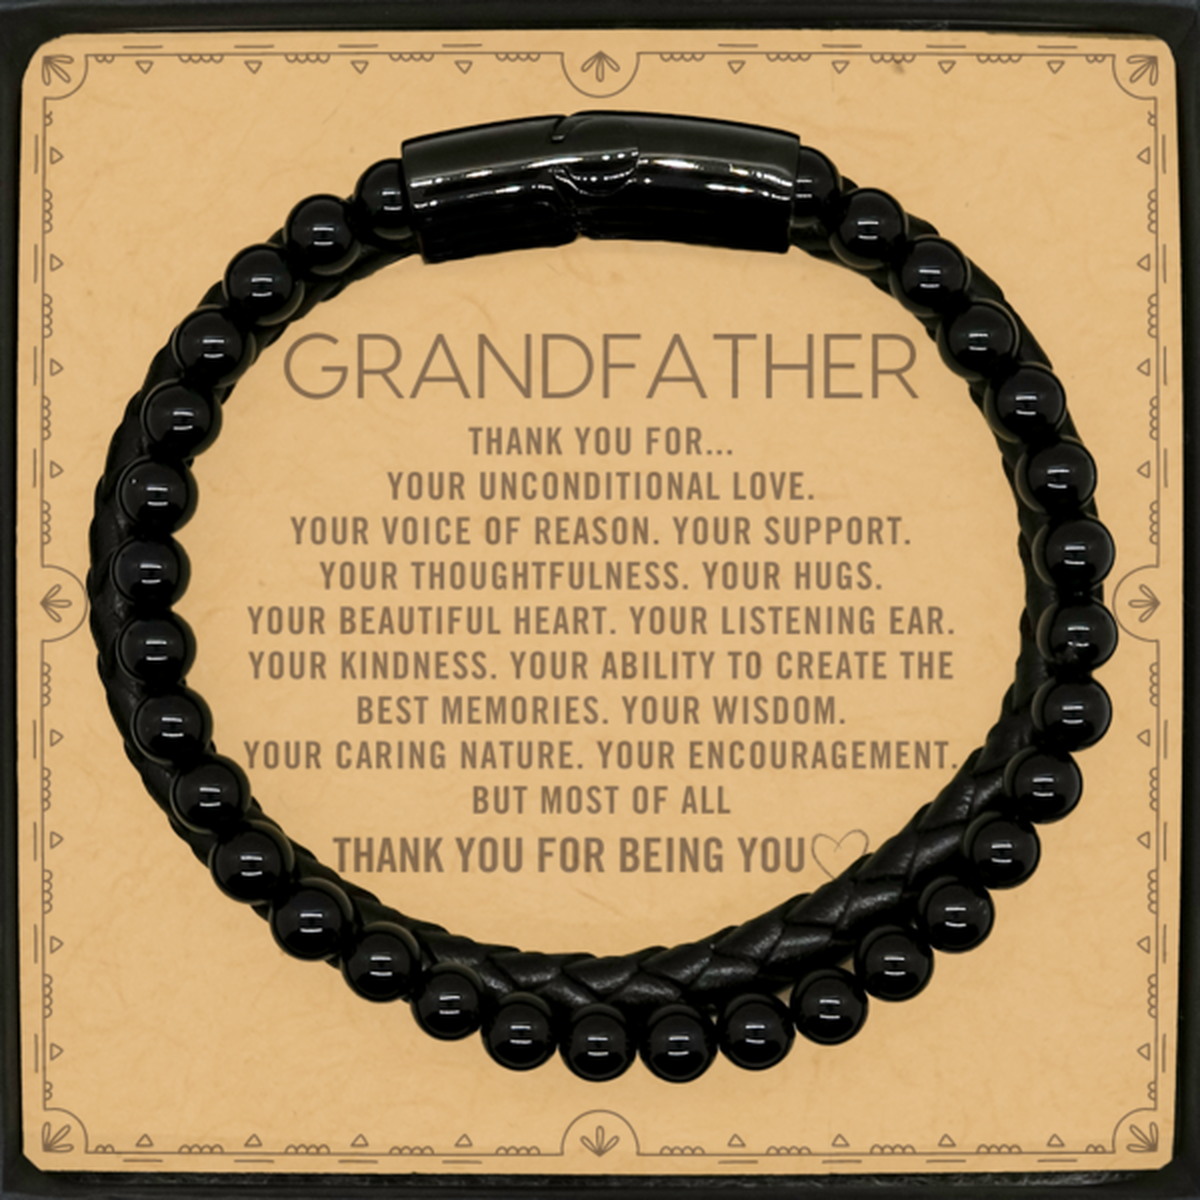 Grandfather Stone Leather Bracelets Custom, Message Card Gifts For Grandfather Christmas Graduation Birthday Gifts for Men Women Grandfather Thank you for Your unconditional love